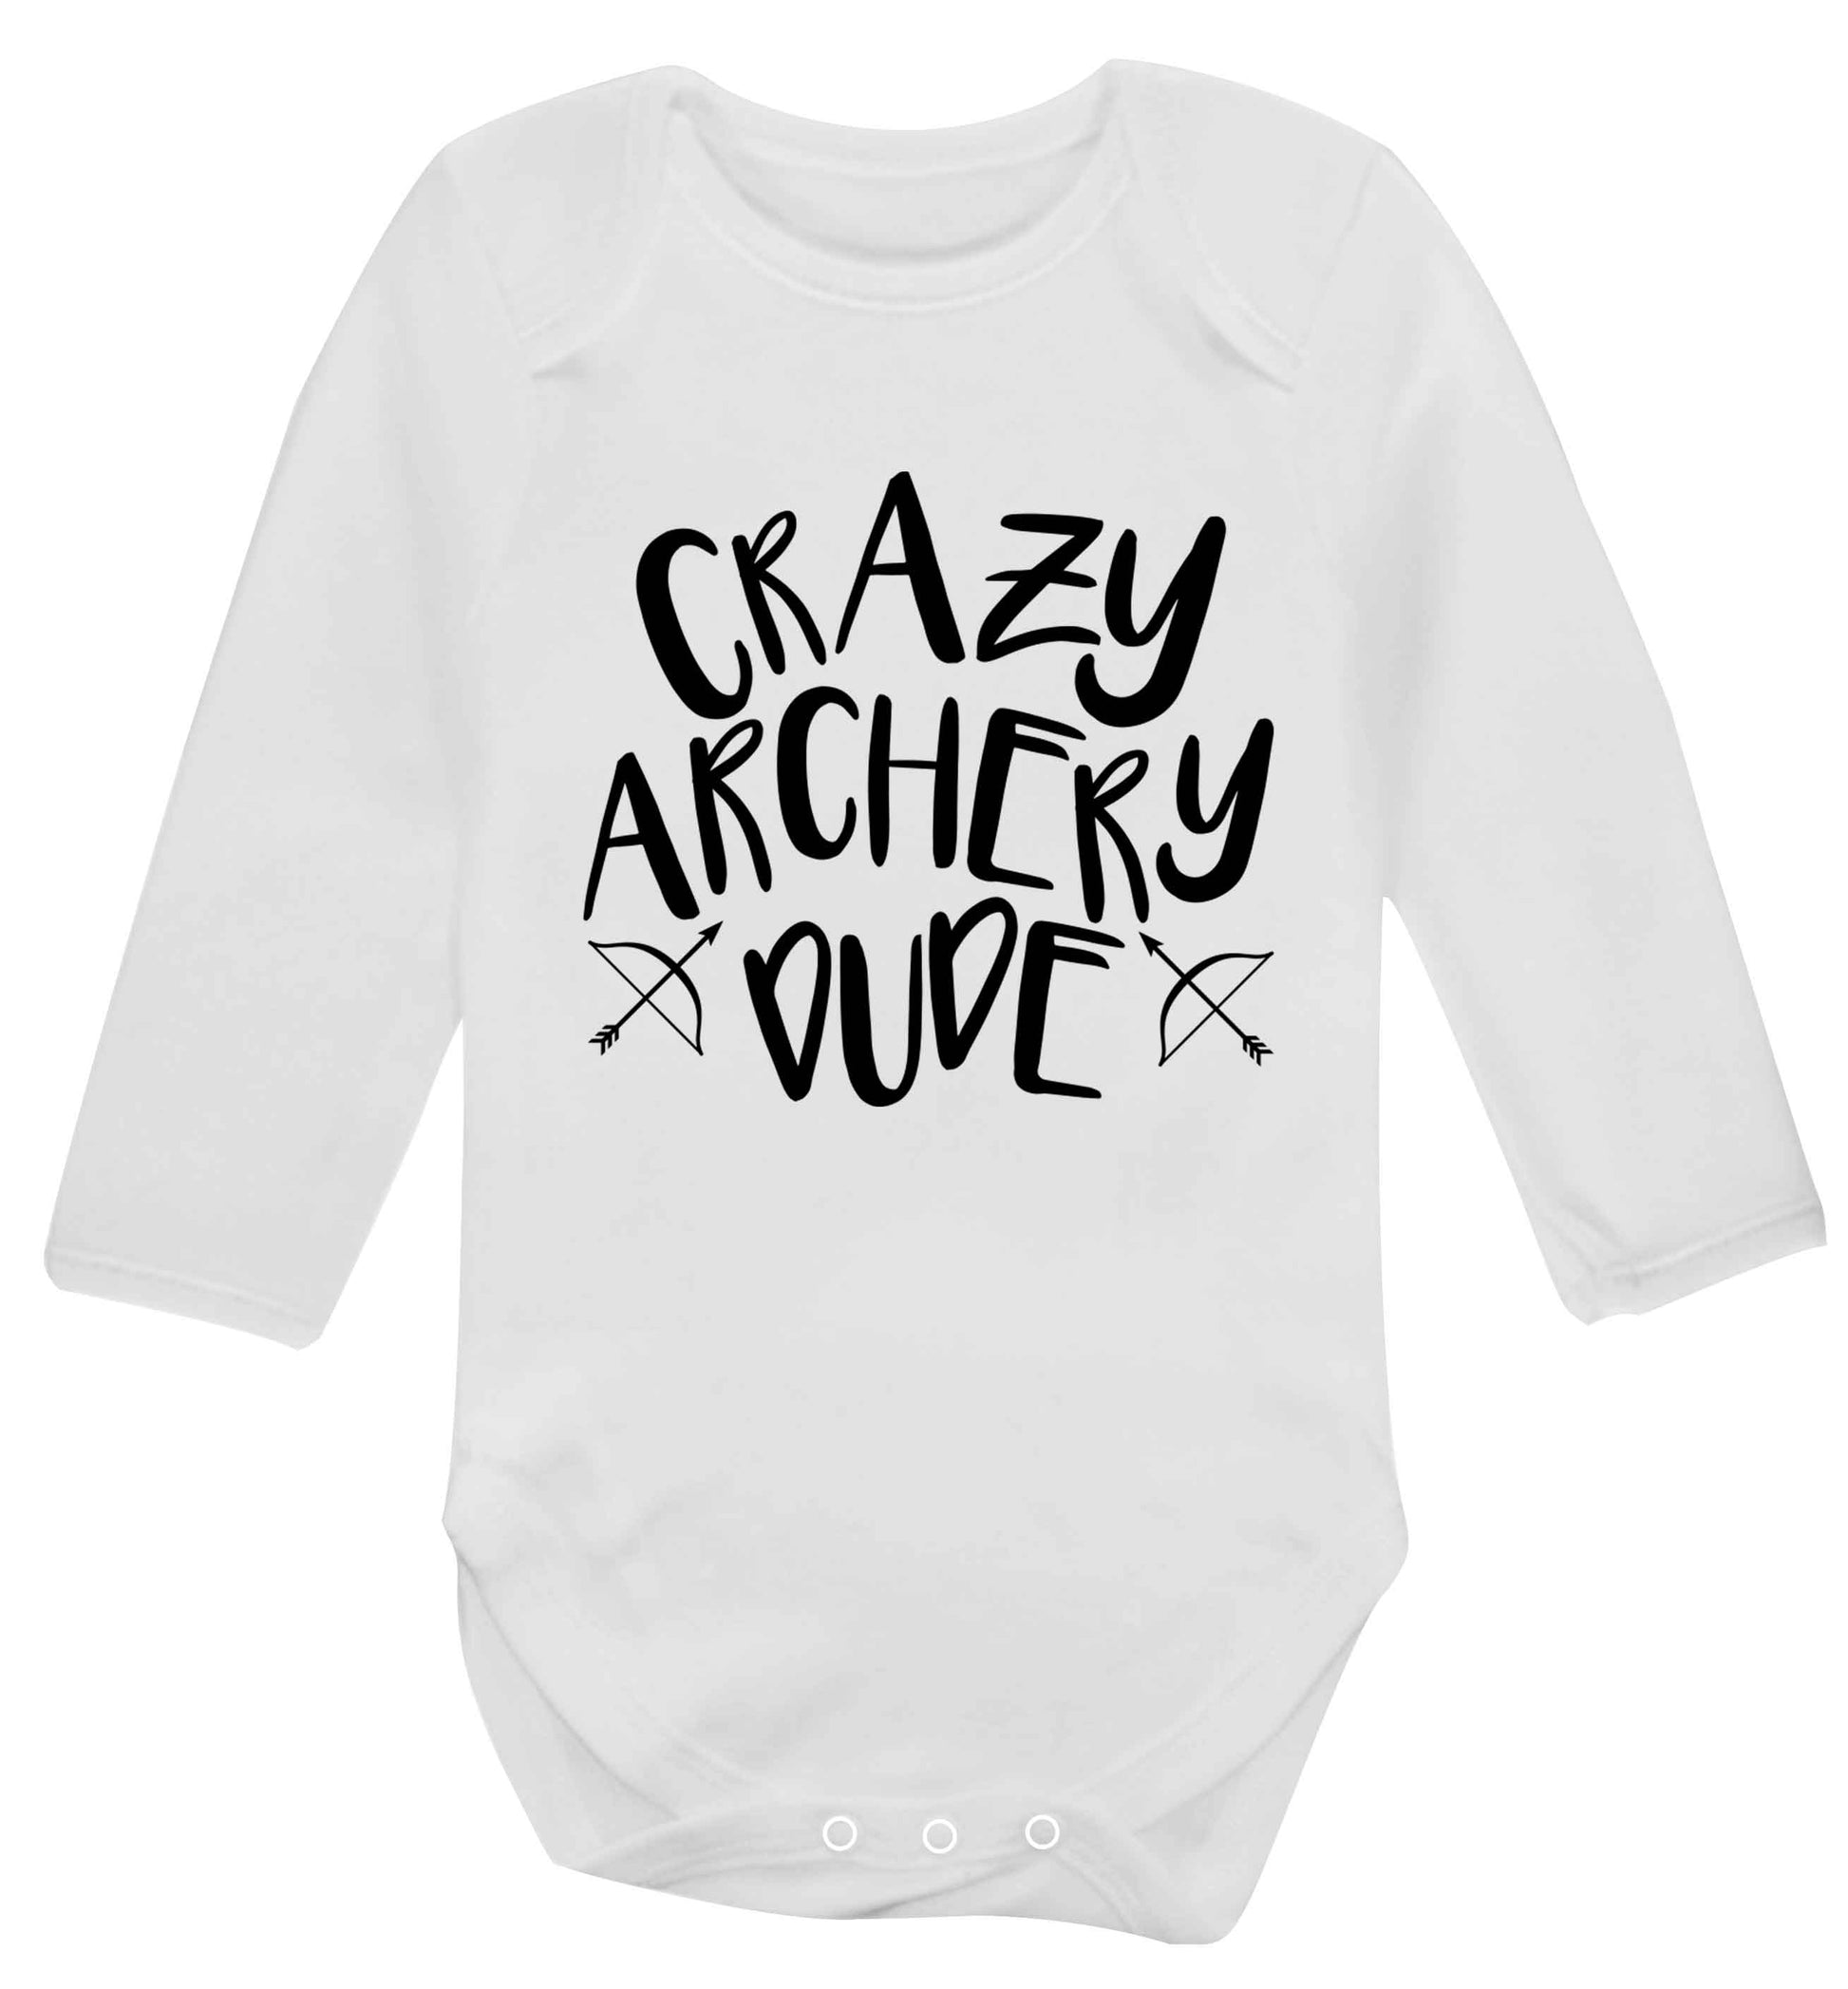 Crazy archery dude Baby Vest long sleeved white 6-12 months